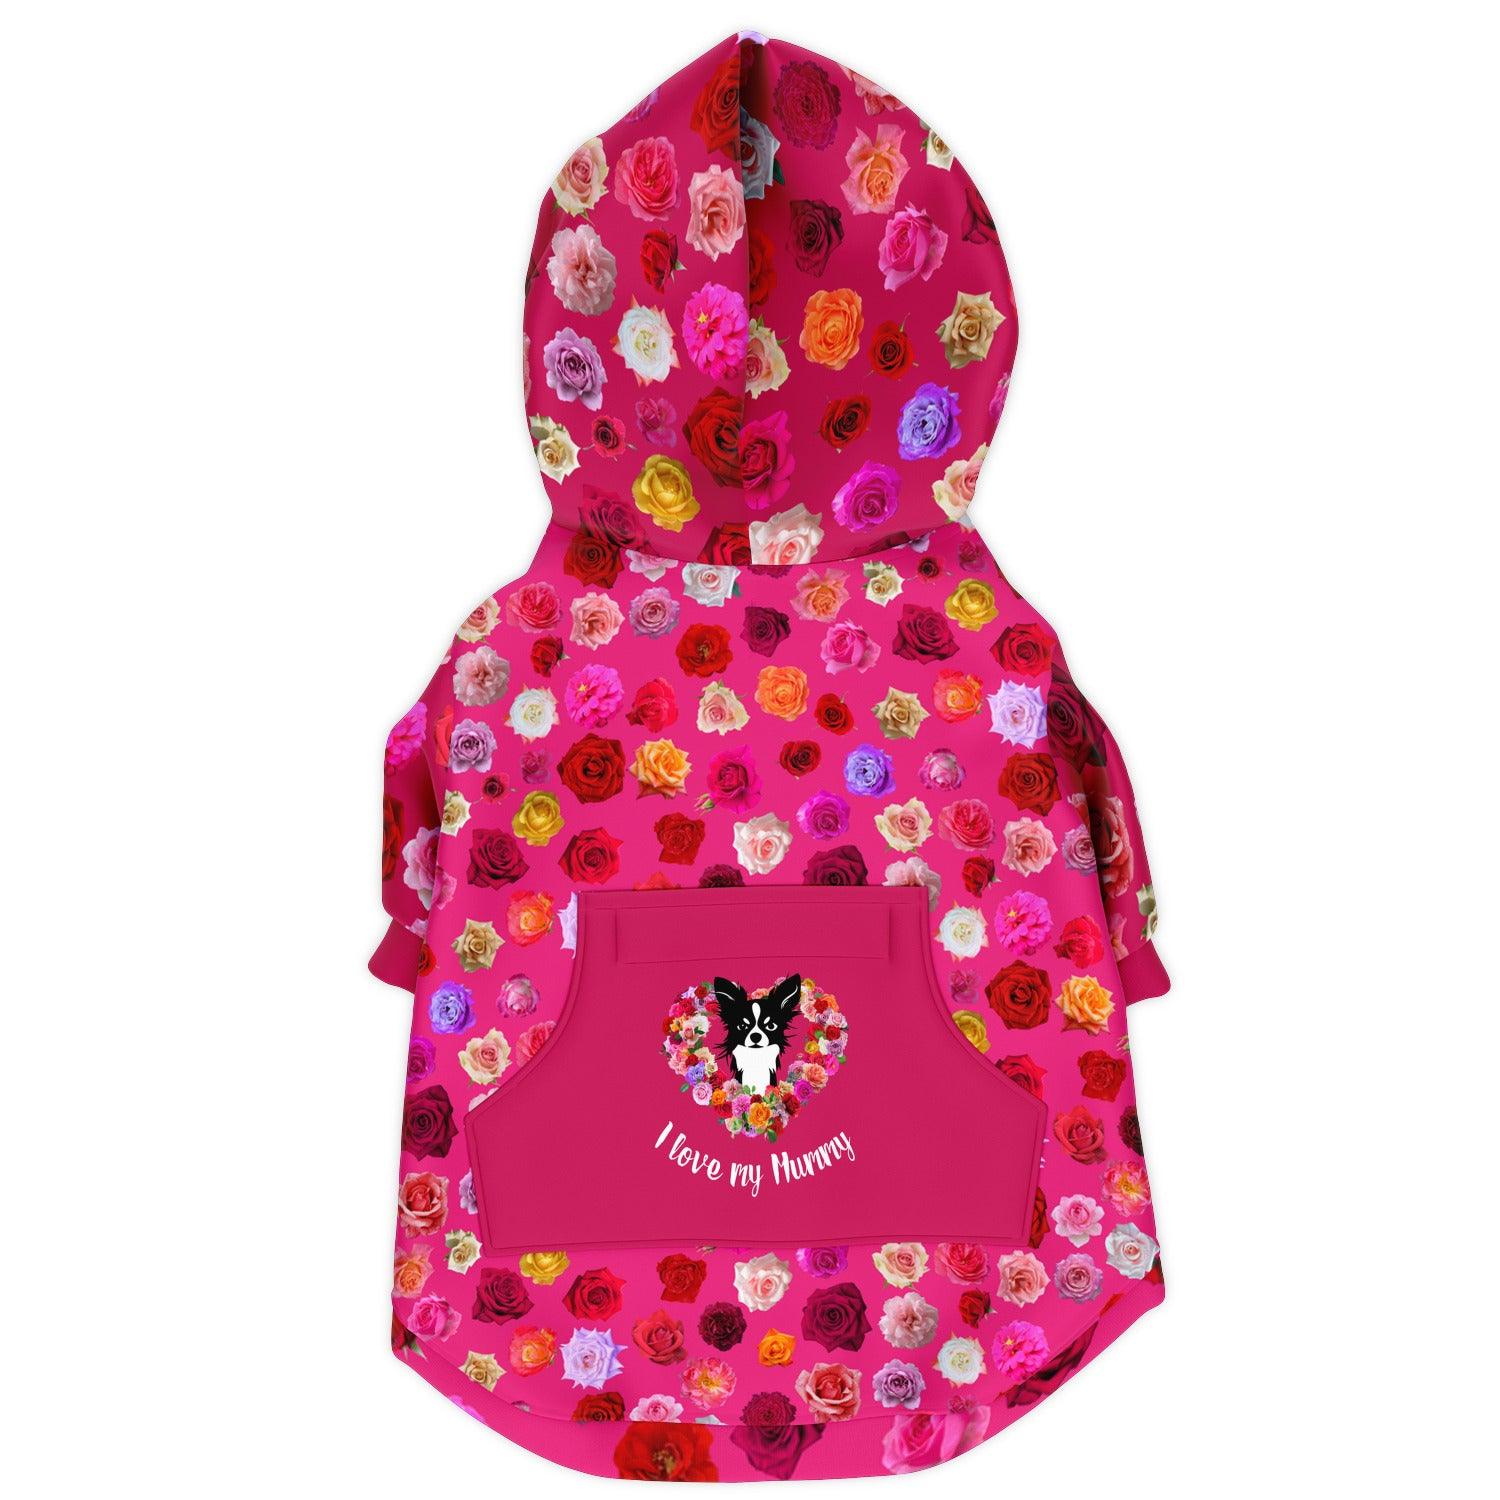 I love my Mummy Chihuahua hoodie jacket. Covered in roses of many shades to match the rose "doting chihuahua mummy" snug hoodie for women. A handy velcro pouch pocket on the back features a chihuahua surrounded by a love heart of roses and the words "I love my Mummy". The chest zips open and the hoodie even comes with an on-trend flat drawstring. So cute! The inside is brushed fleece to keep your chi cosy on walkies, or on cold winter nights cuddling on the sofa. Design by Renate Kriegler for Chimigos.